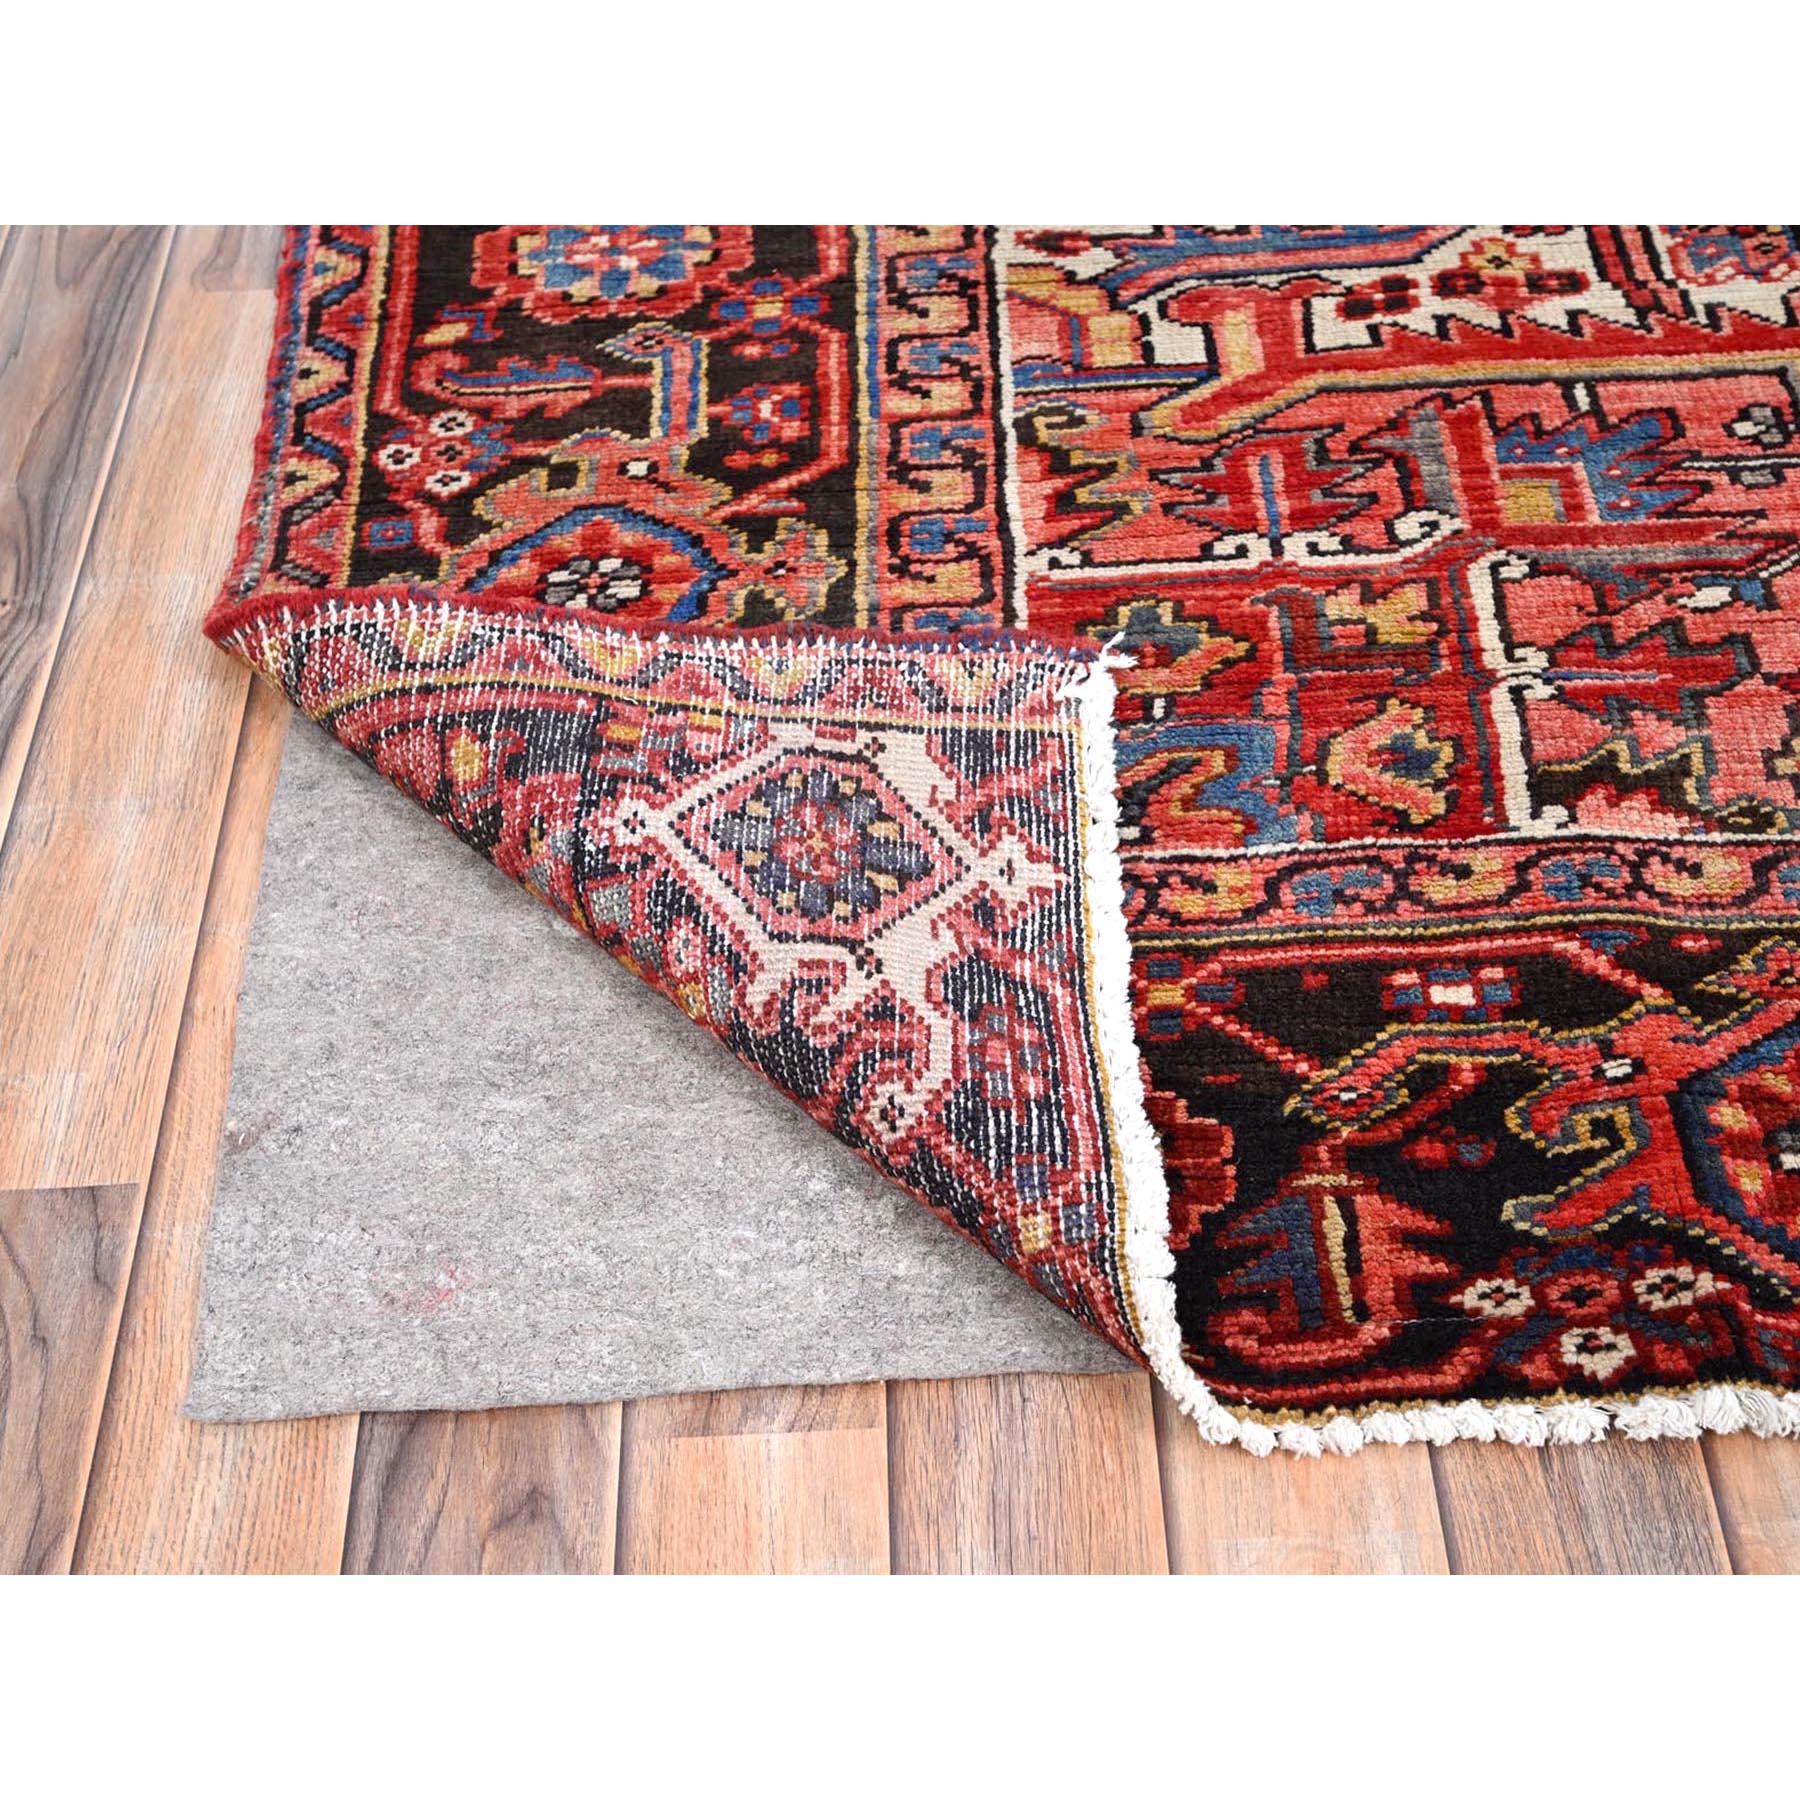 8'5"x11'8" Imperial Red, Semi Antique Persian Heriz, Good Condition, Rustic Feel, Worn Wool, Hand Woven, Oriental Rug 